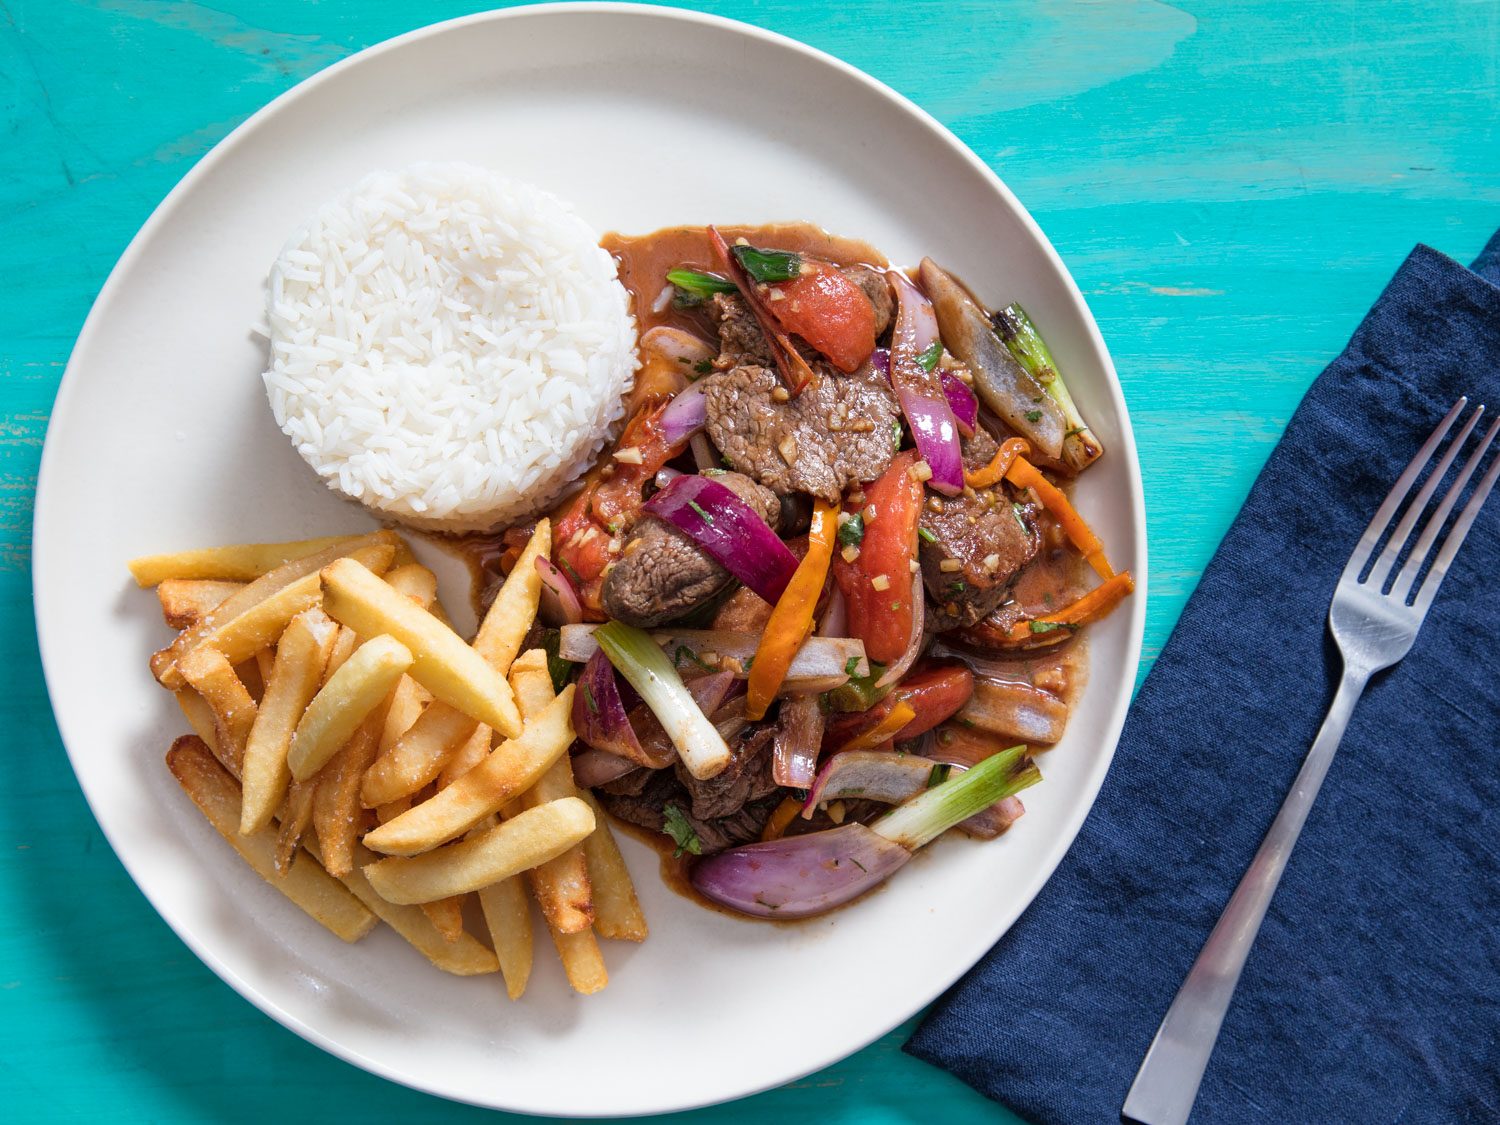 Lomo Saltado (Peruvian Stir-Fried Beef With Onion, Tomatoes, and French Fries)